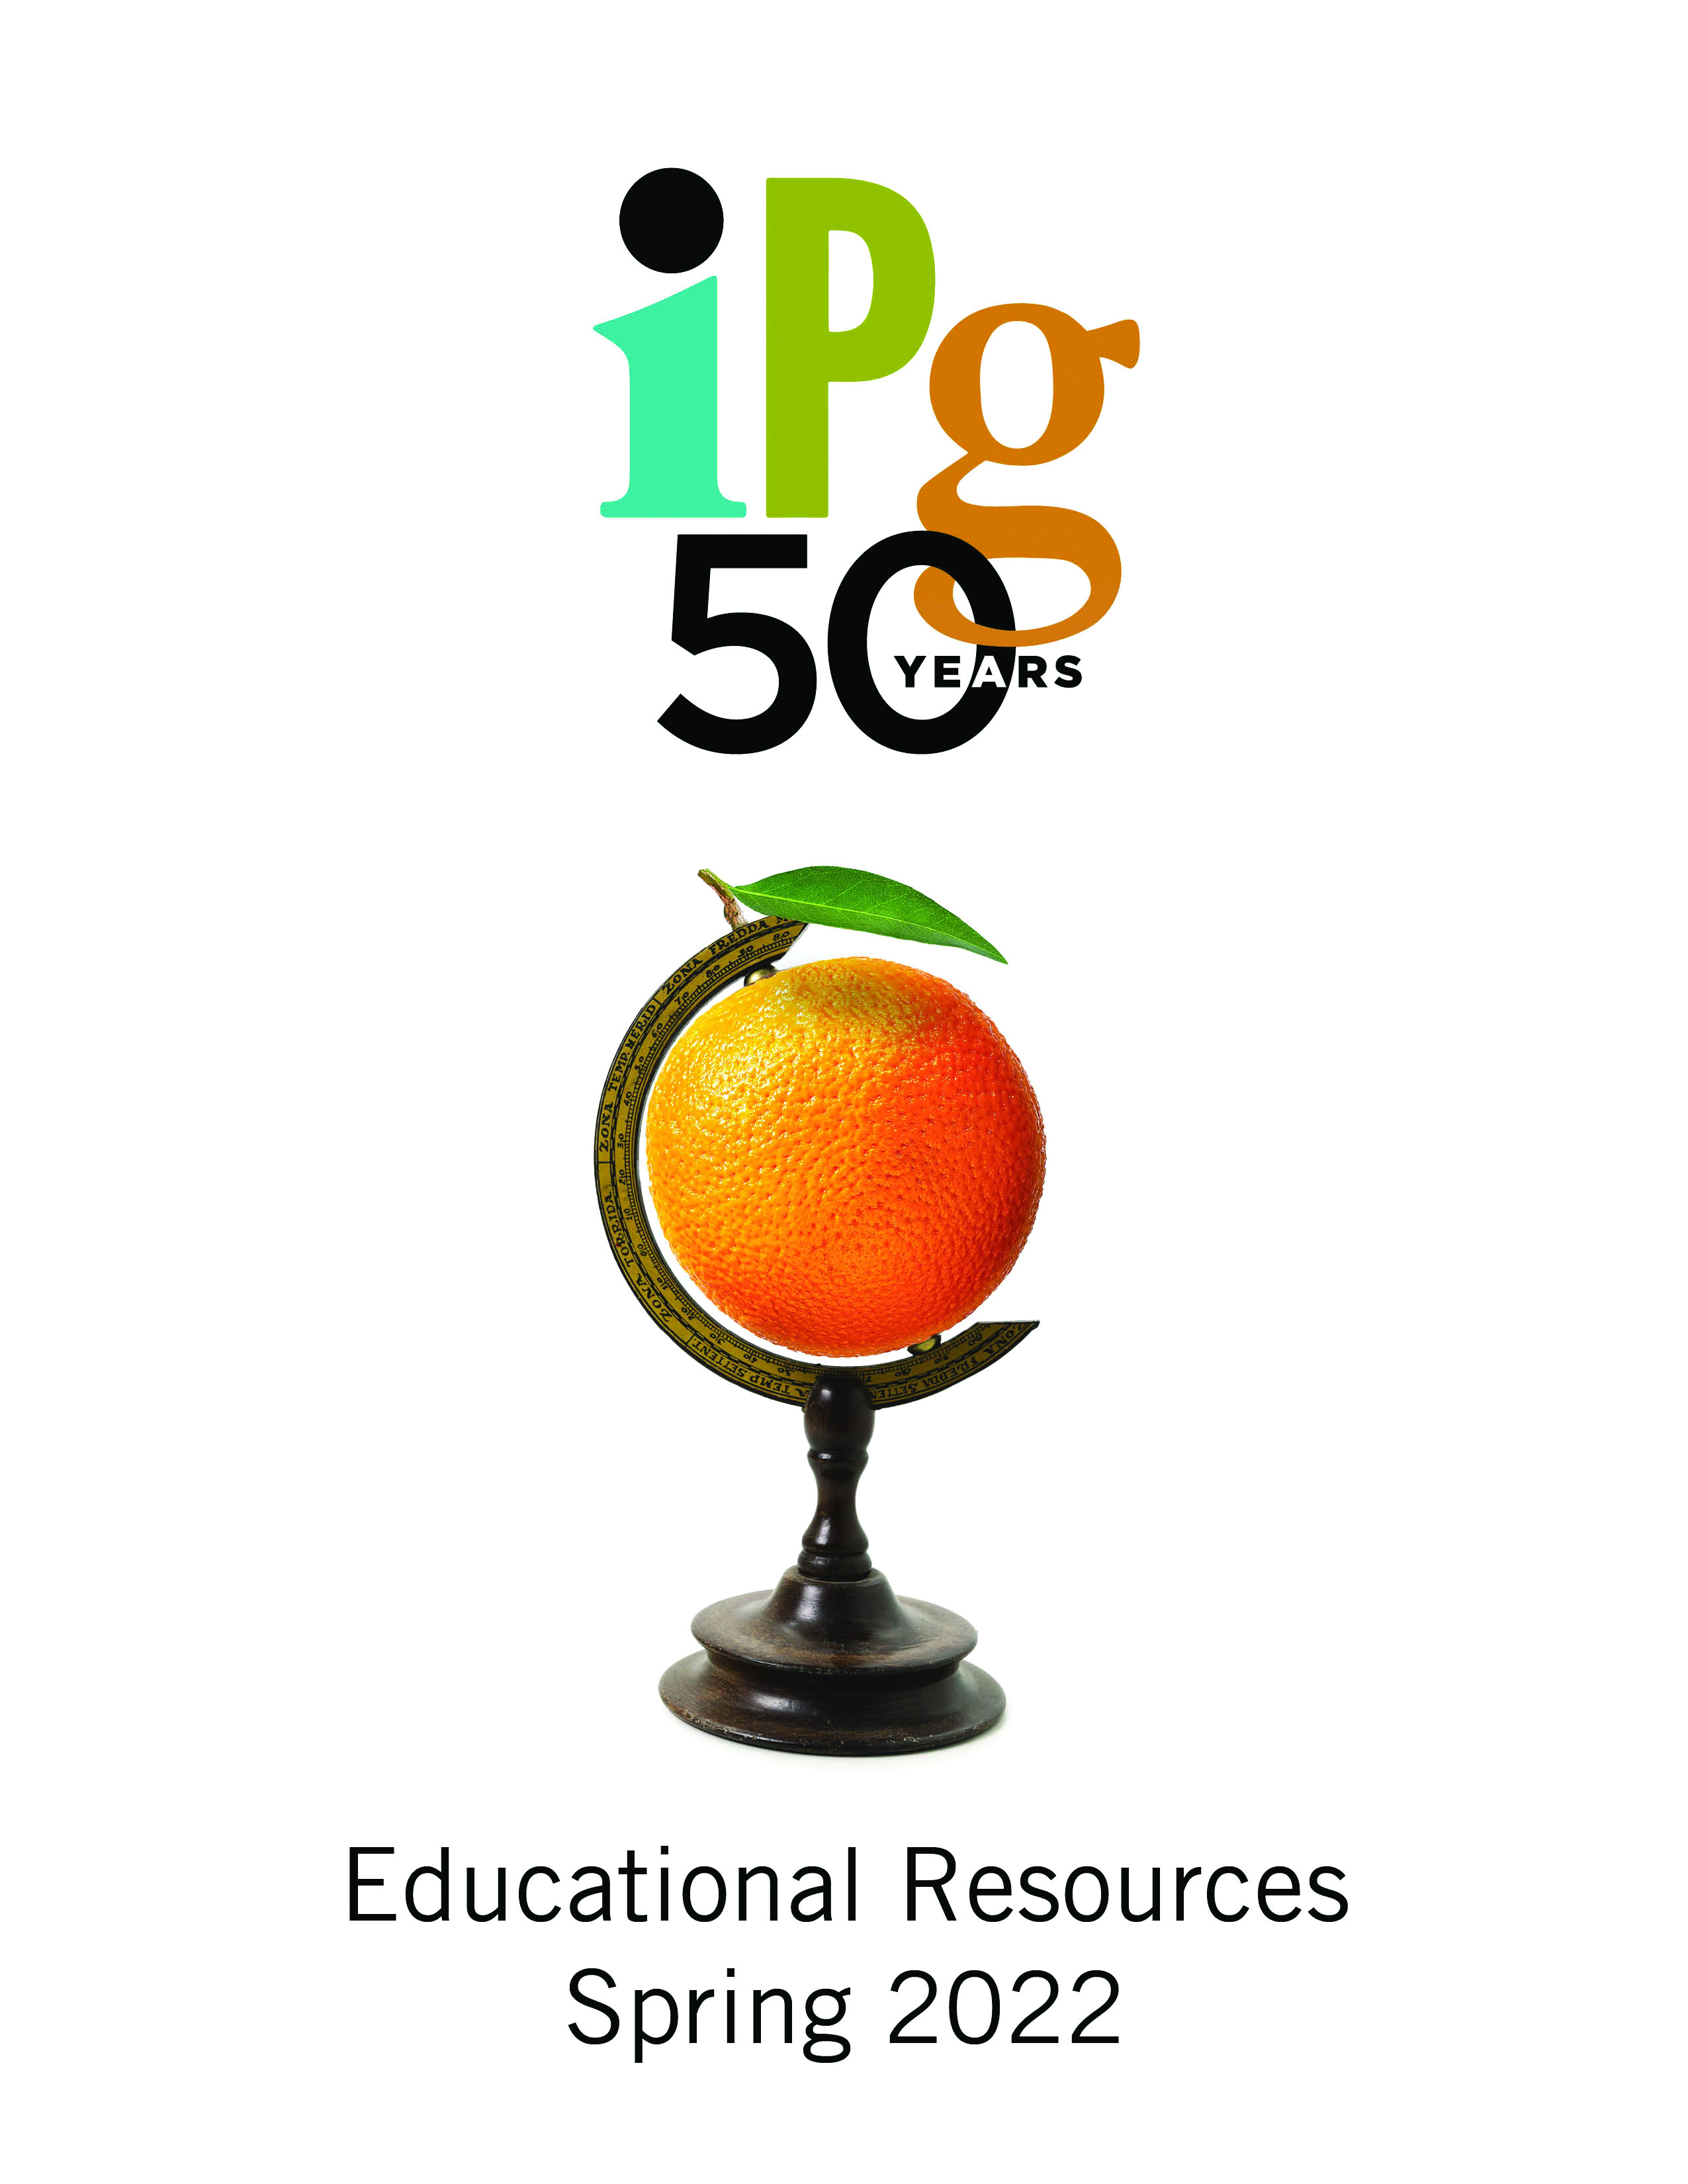 IPG Educational Resources Catalog